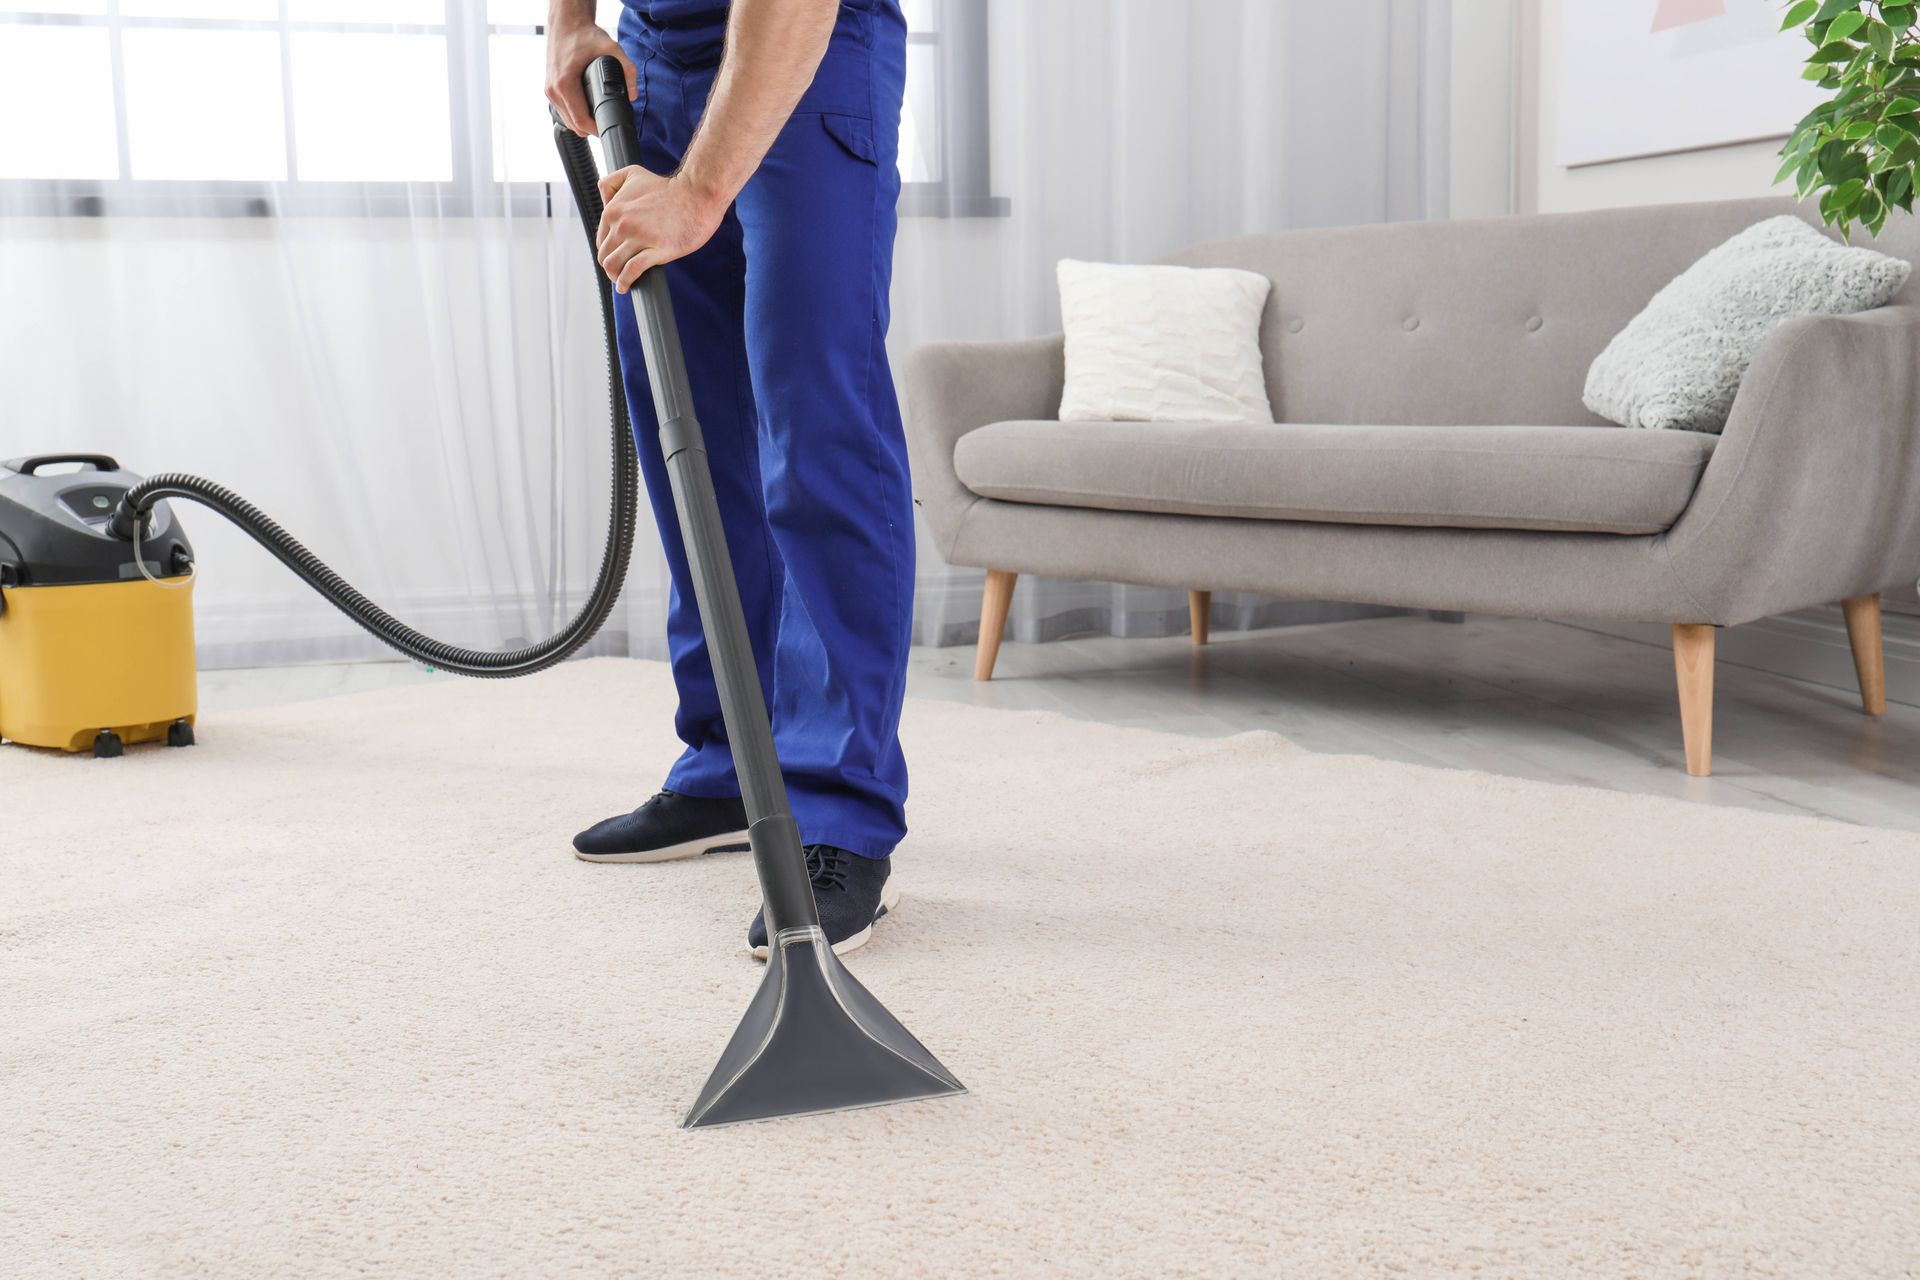 a man is using a vacuum cleaner to clean a carpet in a living room 